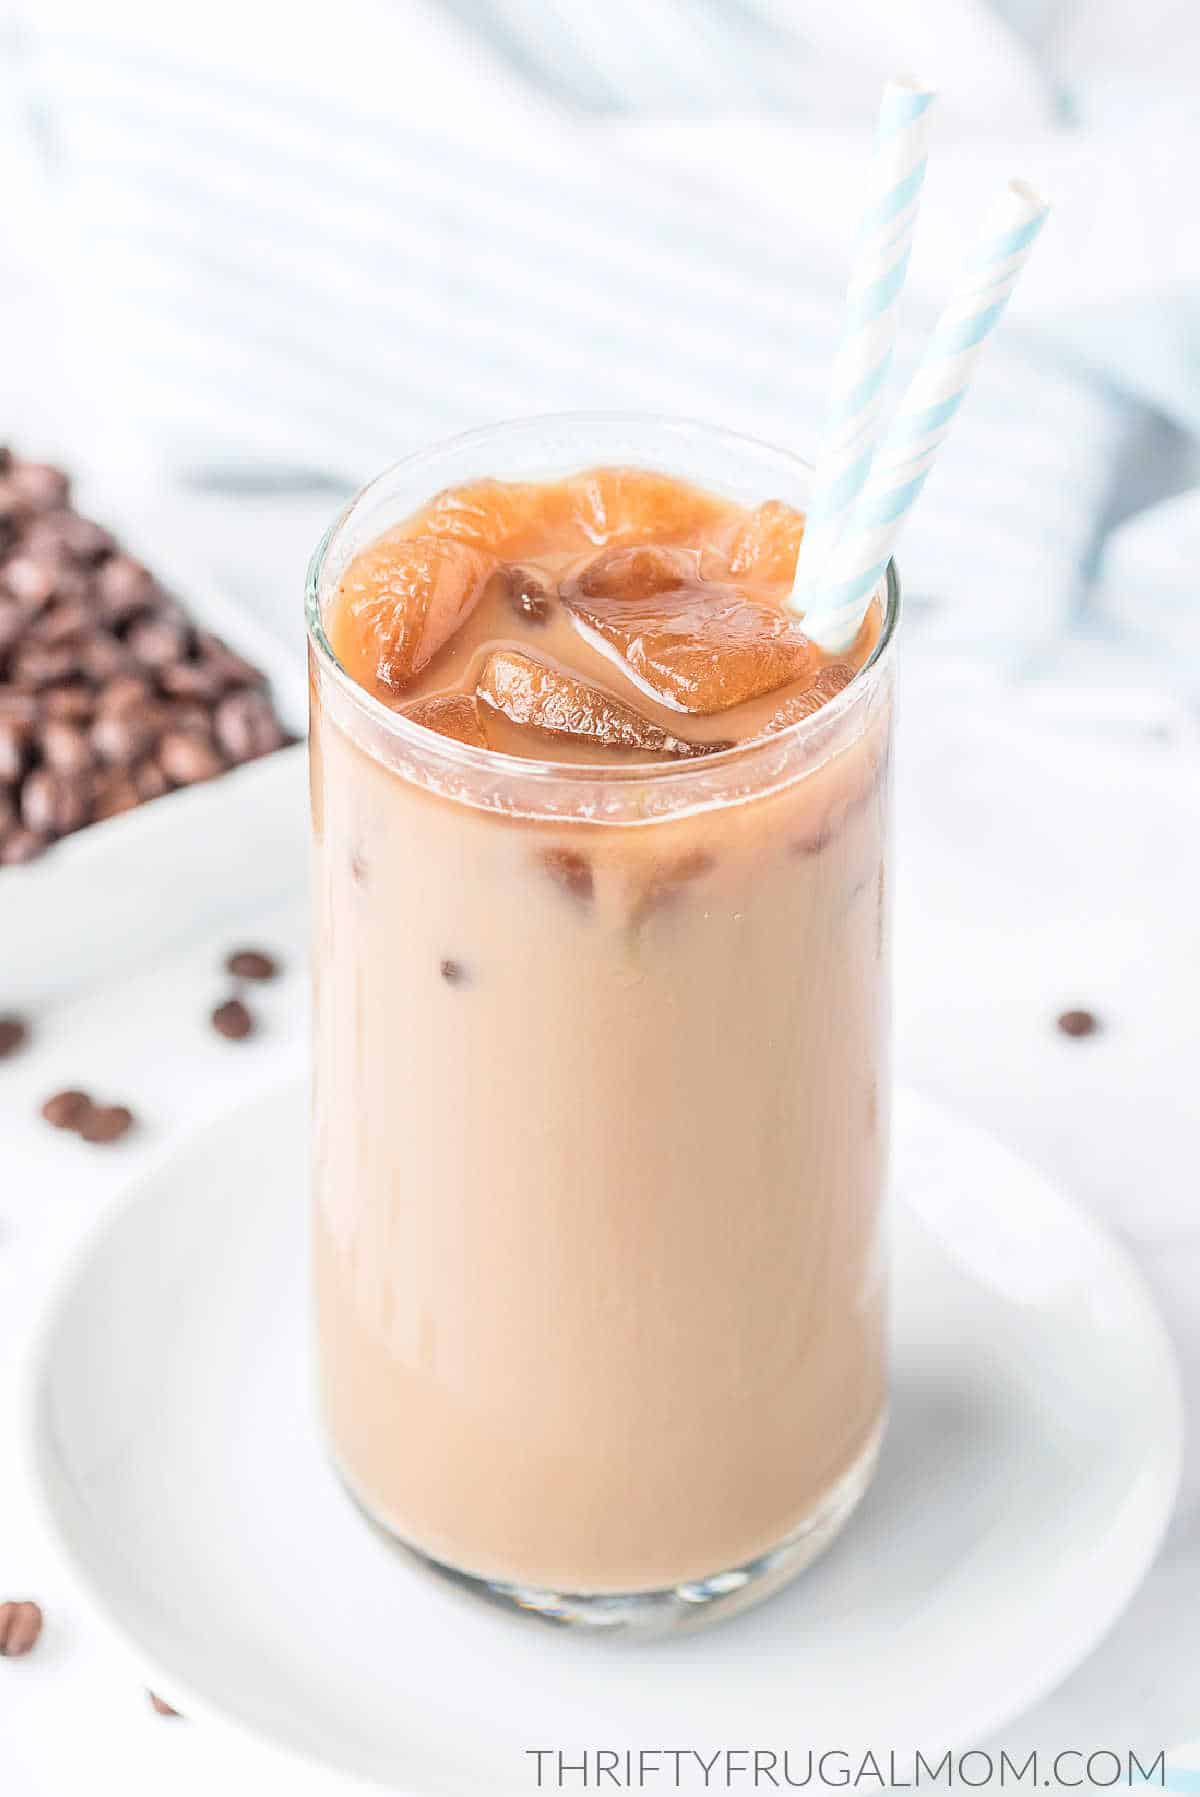 Learn How to Make an Iced Latte at Home - Mommy Hates Cooking